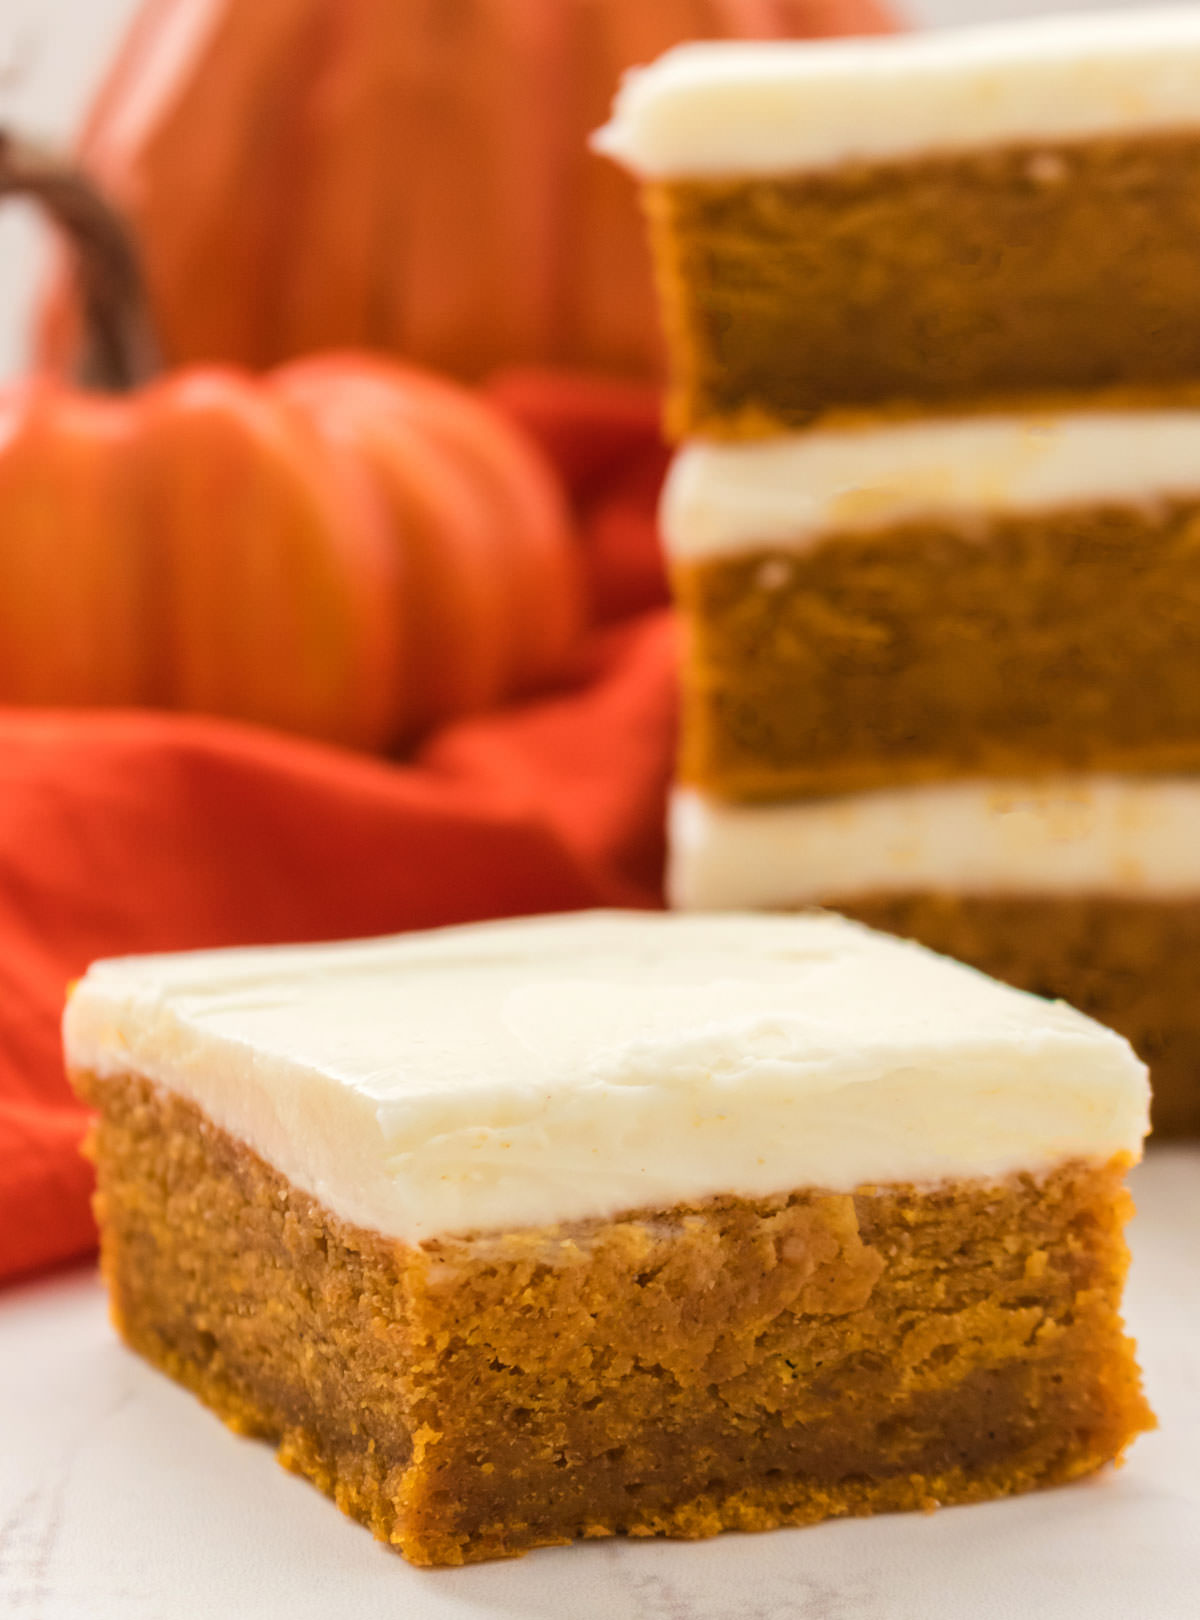 Closeup on a Pumpkin Bar with Cream Cheese Frosting sitting on a white surface in front of a stack of Pumpkin Bars and a Pumpkin decoration.